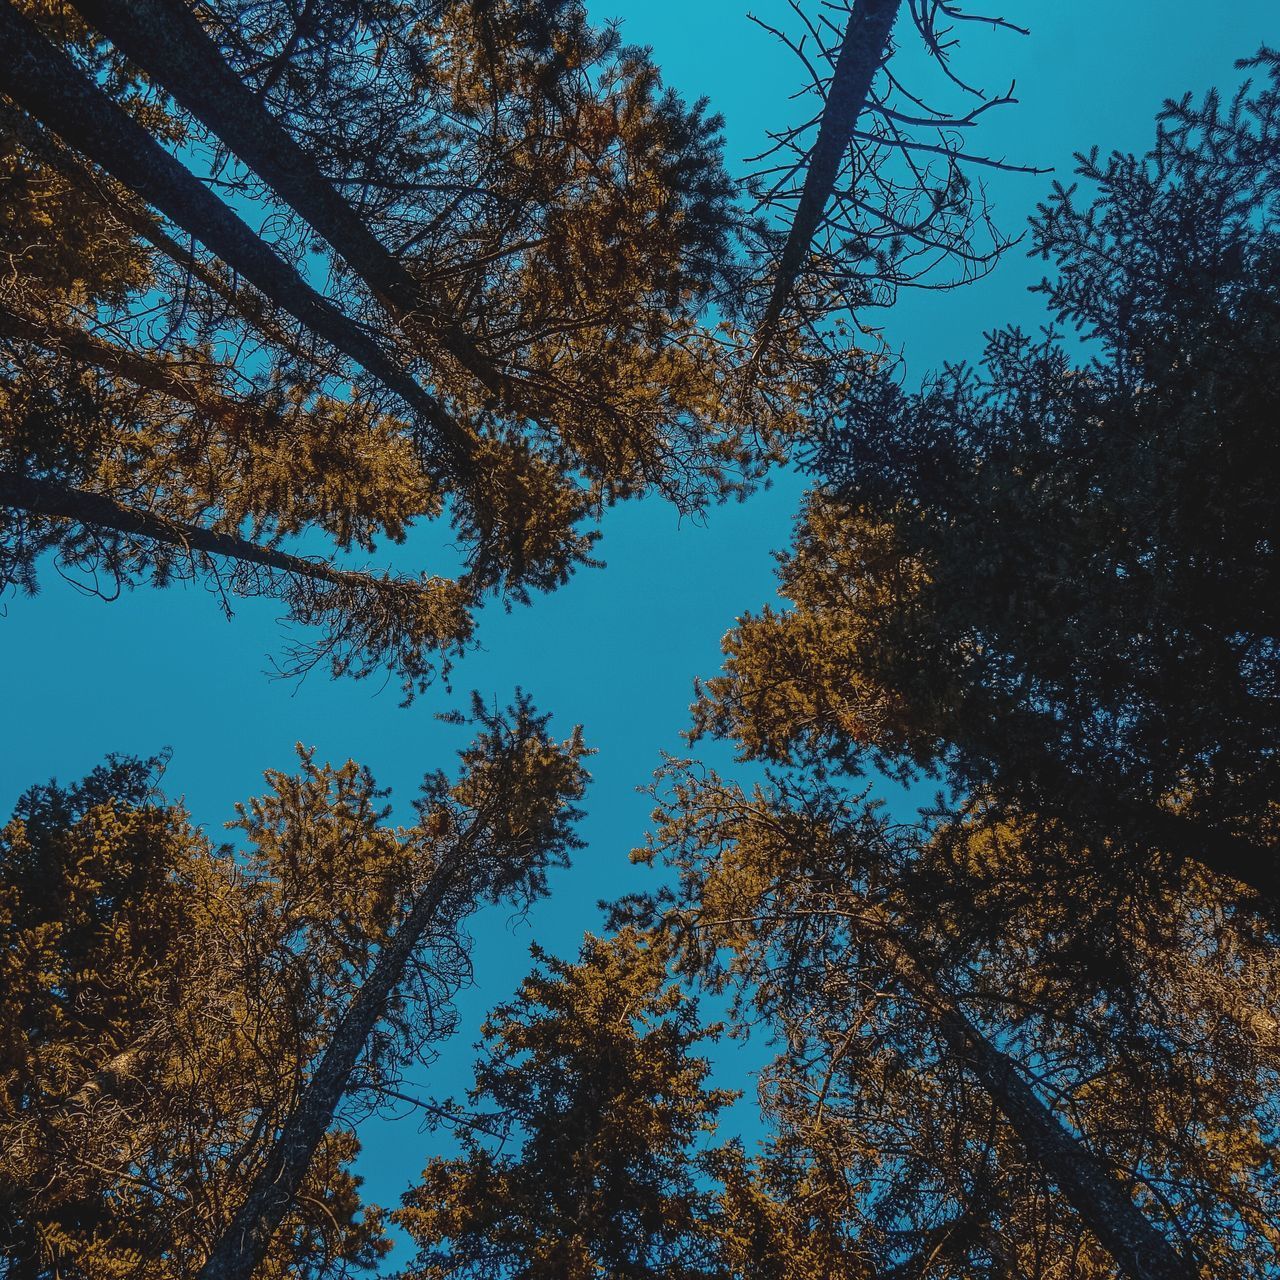 LOW ANGLE VIEW OF TREES IN FOREST AGAINST CLEAR SKY